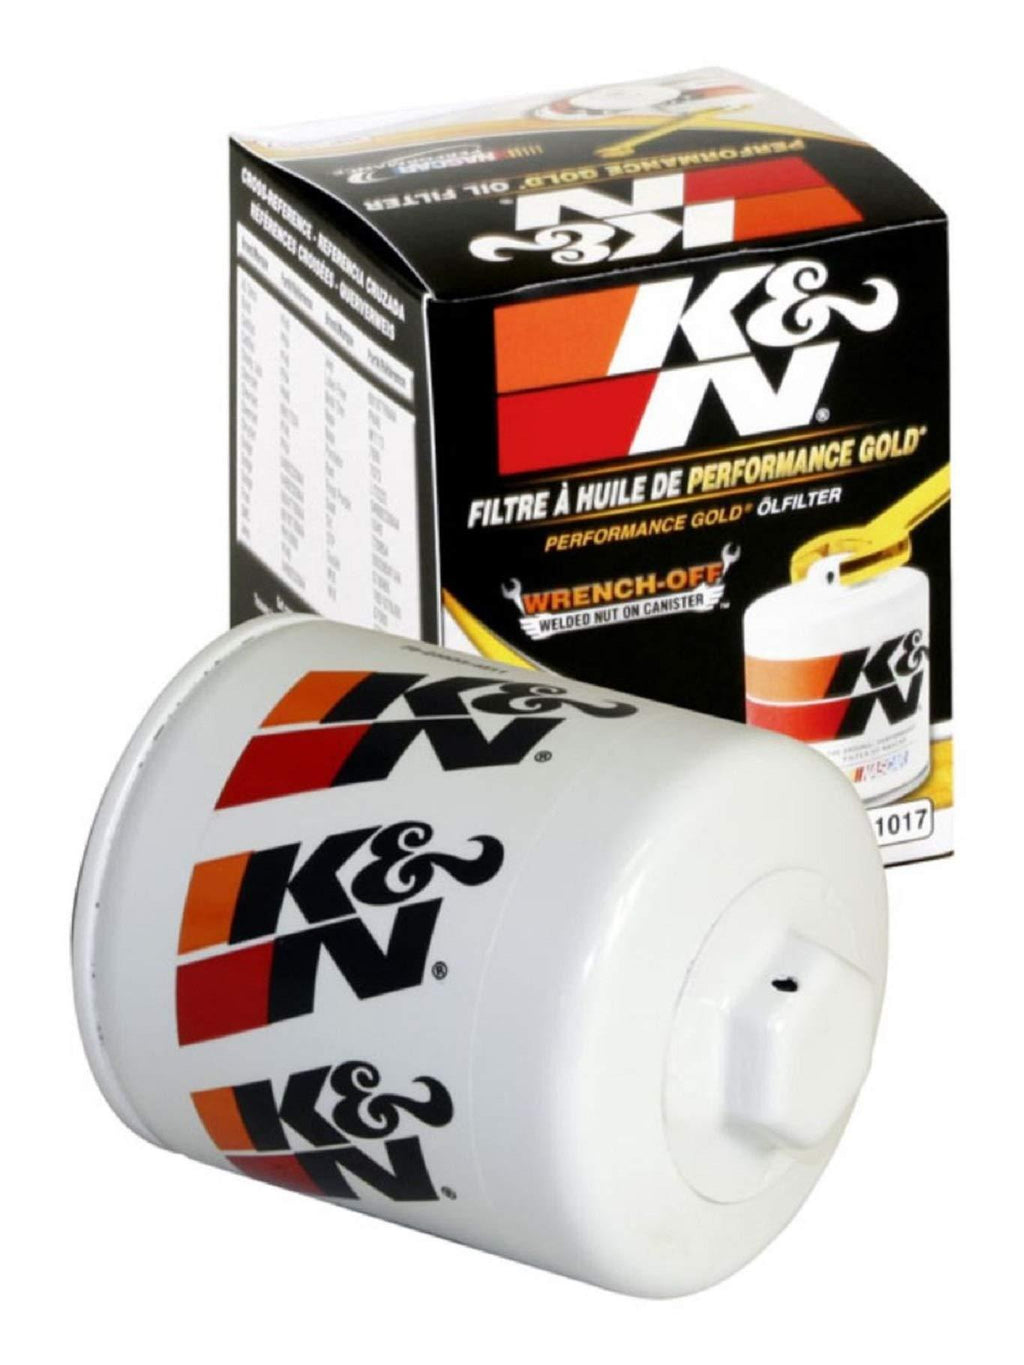 K&N Premium Oil Filter: Designed to Protect your Engine: Fits Select ALFA ROMEO/BUICK/CHEVROLET/DODGE Vehicle Models (See Product Description for Full List of Compatible Vehicles), HP-1017 Oil Filter-1 Pack - LeoForward Australia